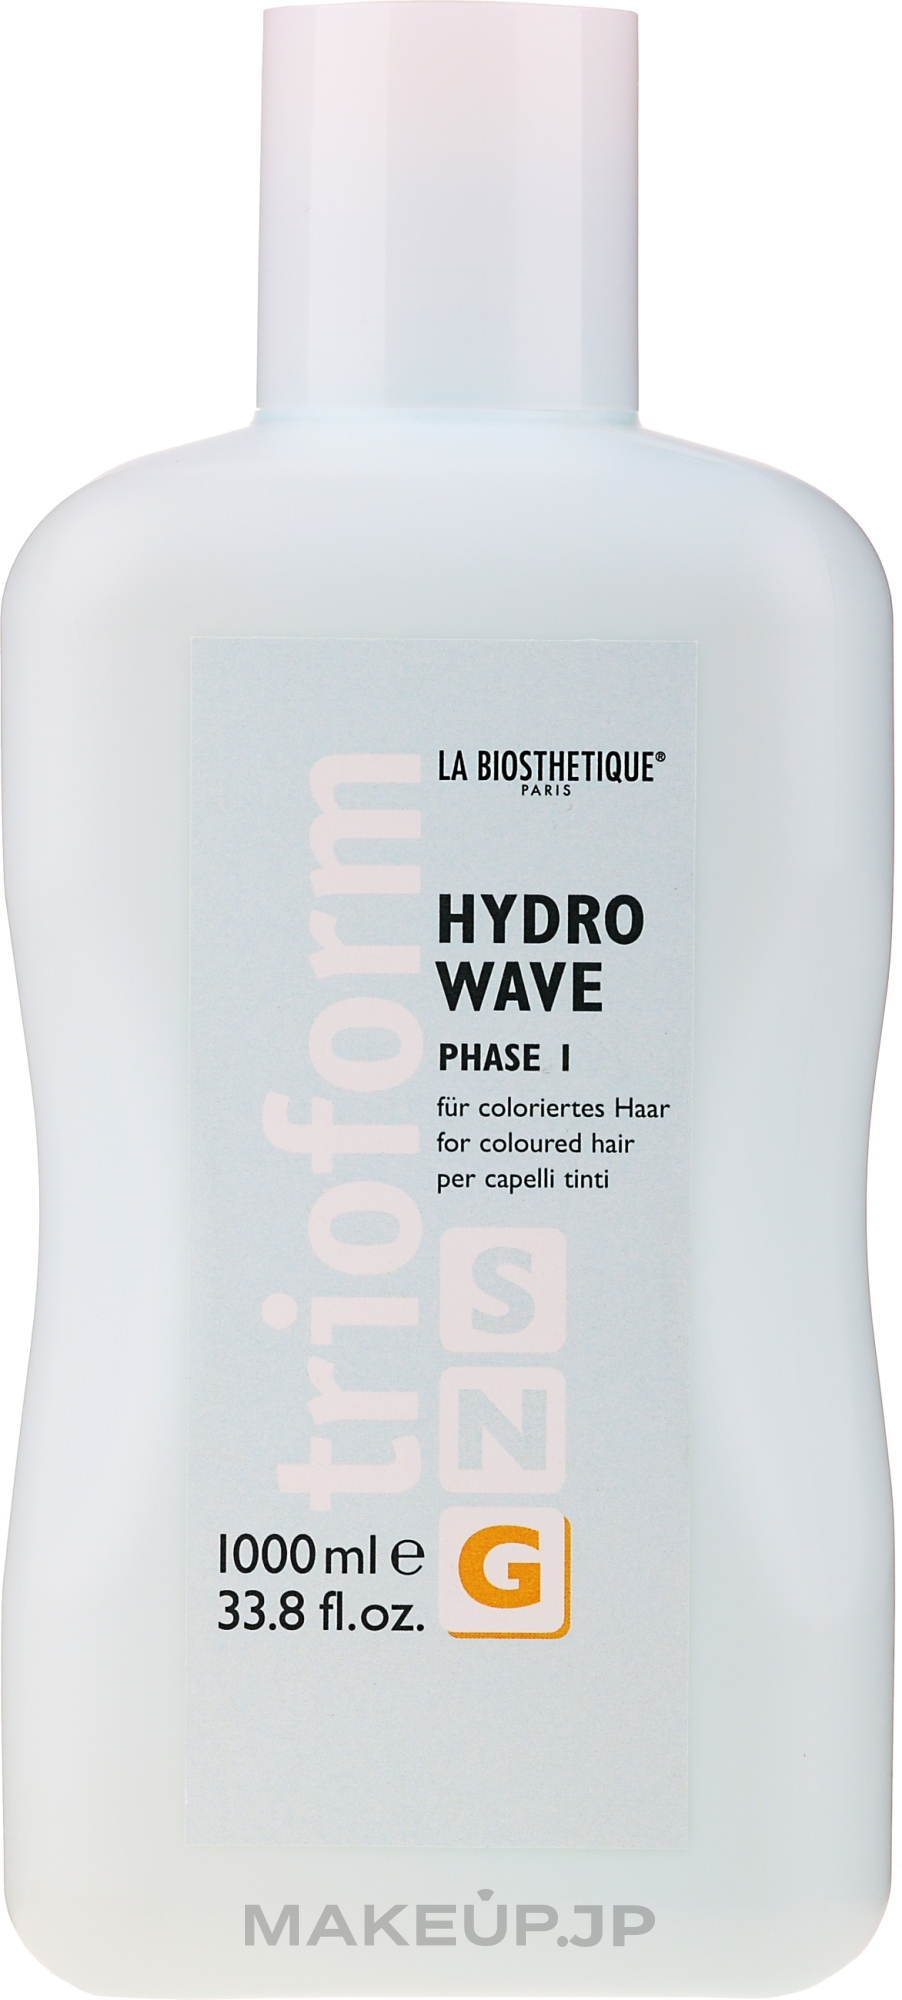 Perm Lotion for Colored Hair - La Biosthetique TrioForm Hydrowave G Professional Use — photo 1000 ml